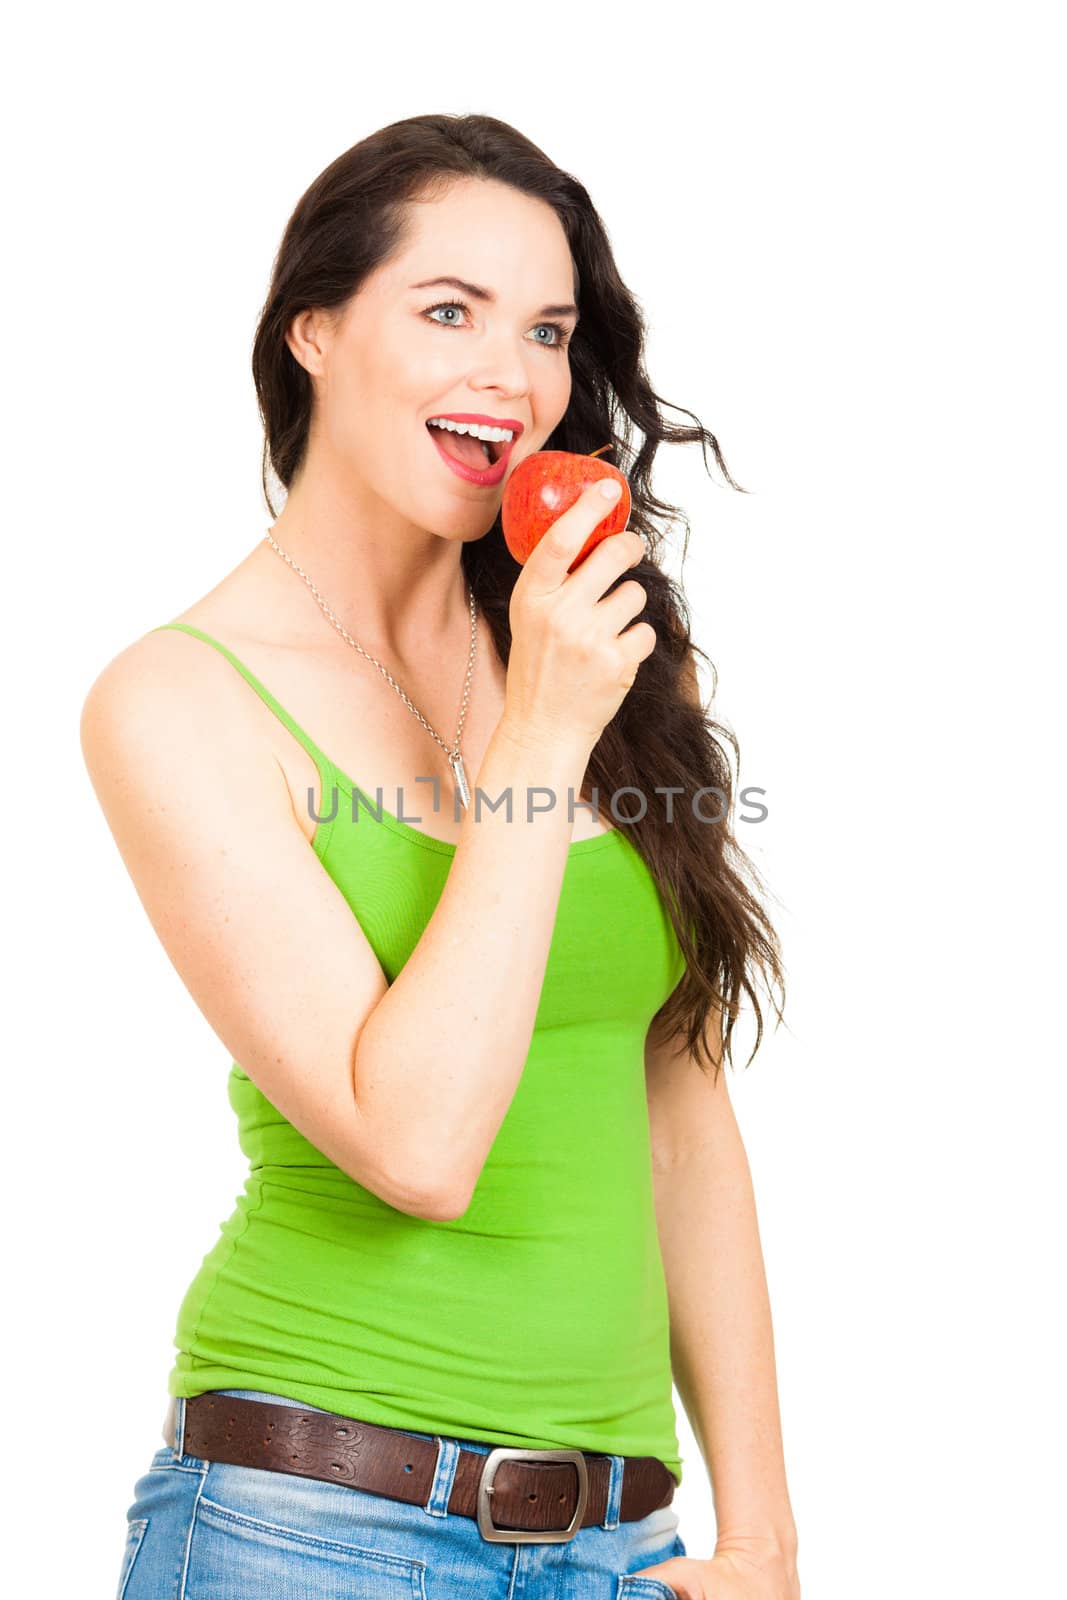 A beautiful young woman biting an apple. Isolated on white